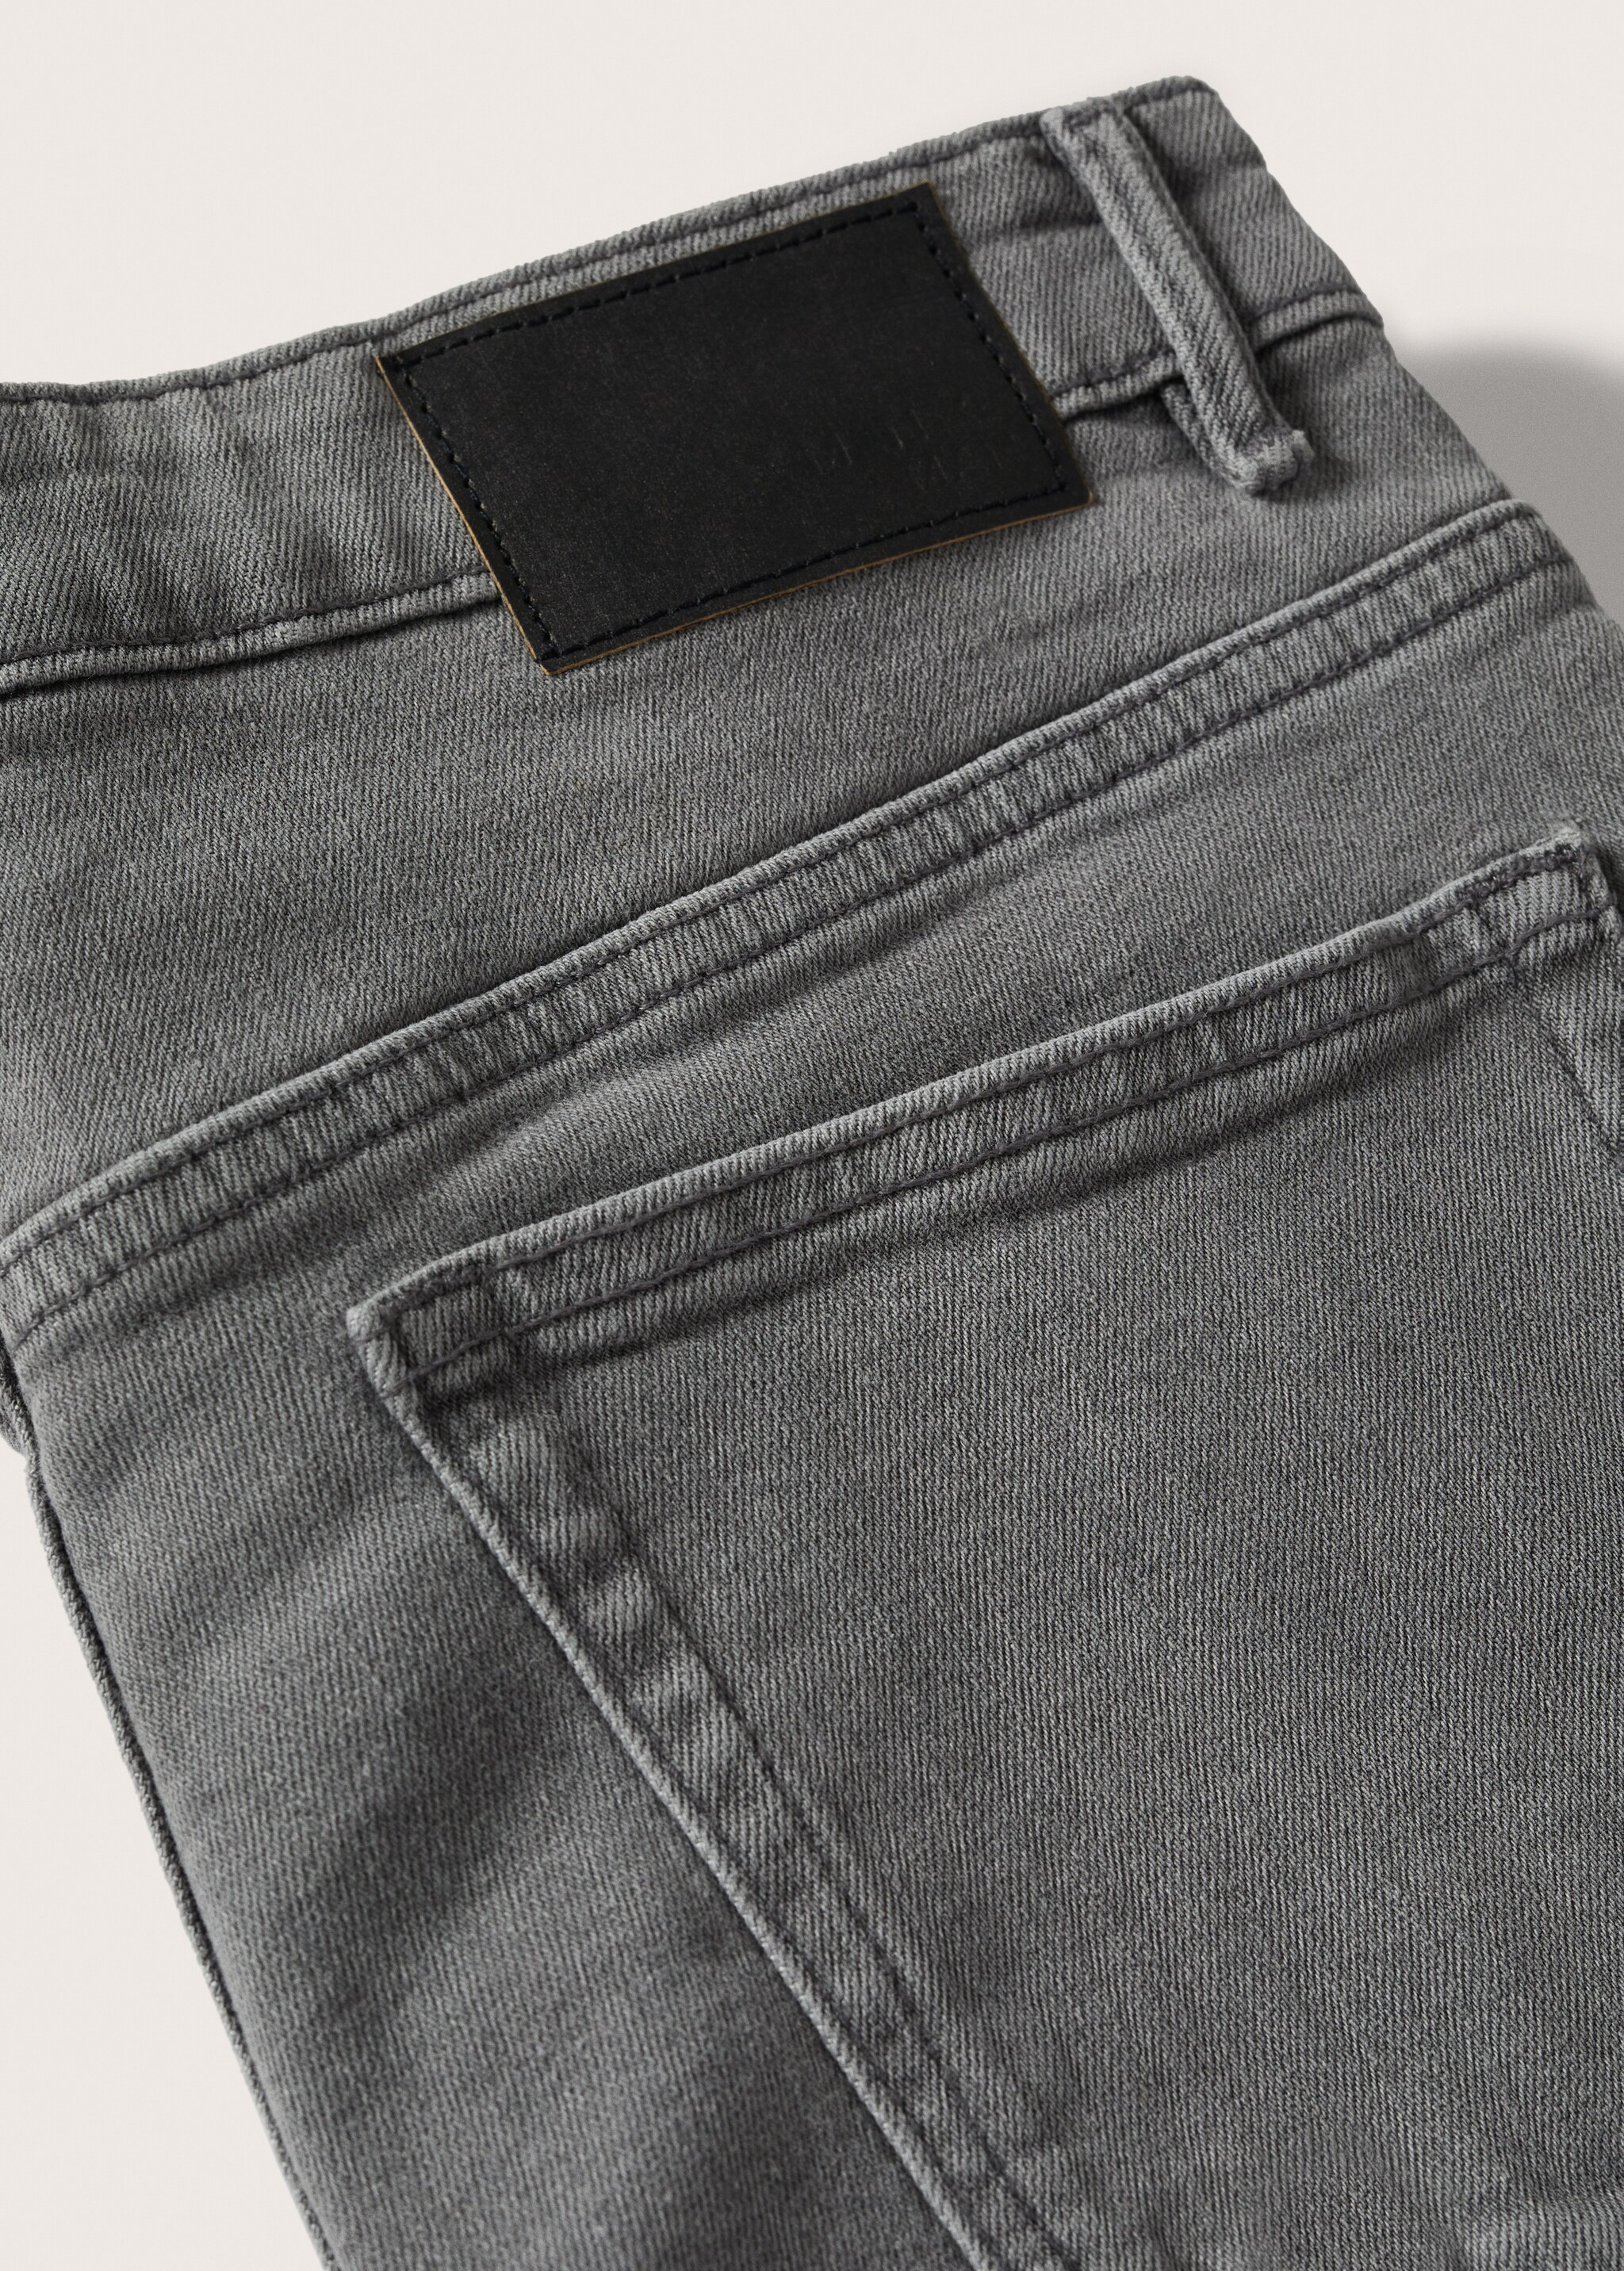 Jude skinny-fit jeans - Details of the article 8